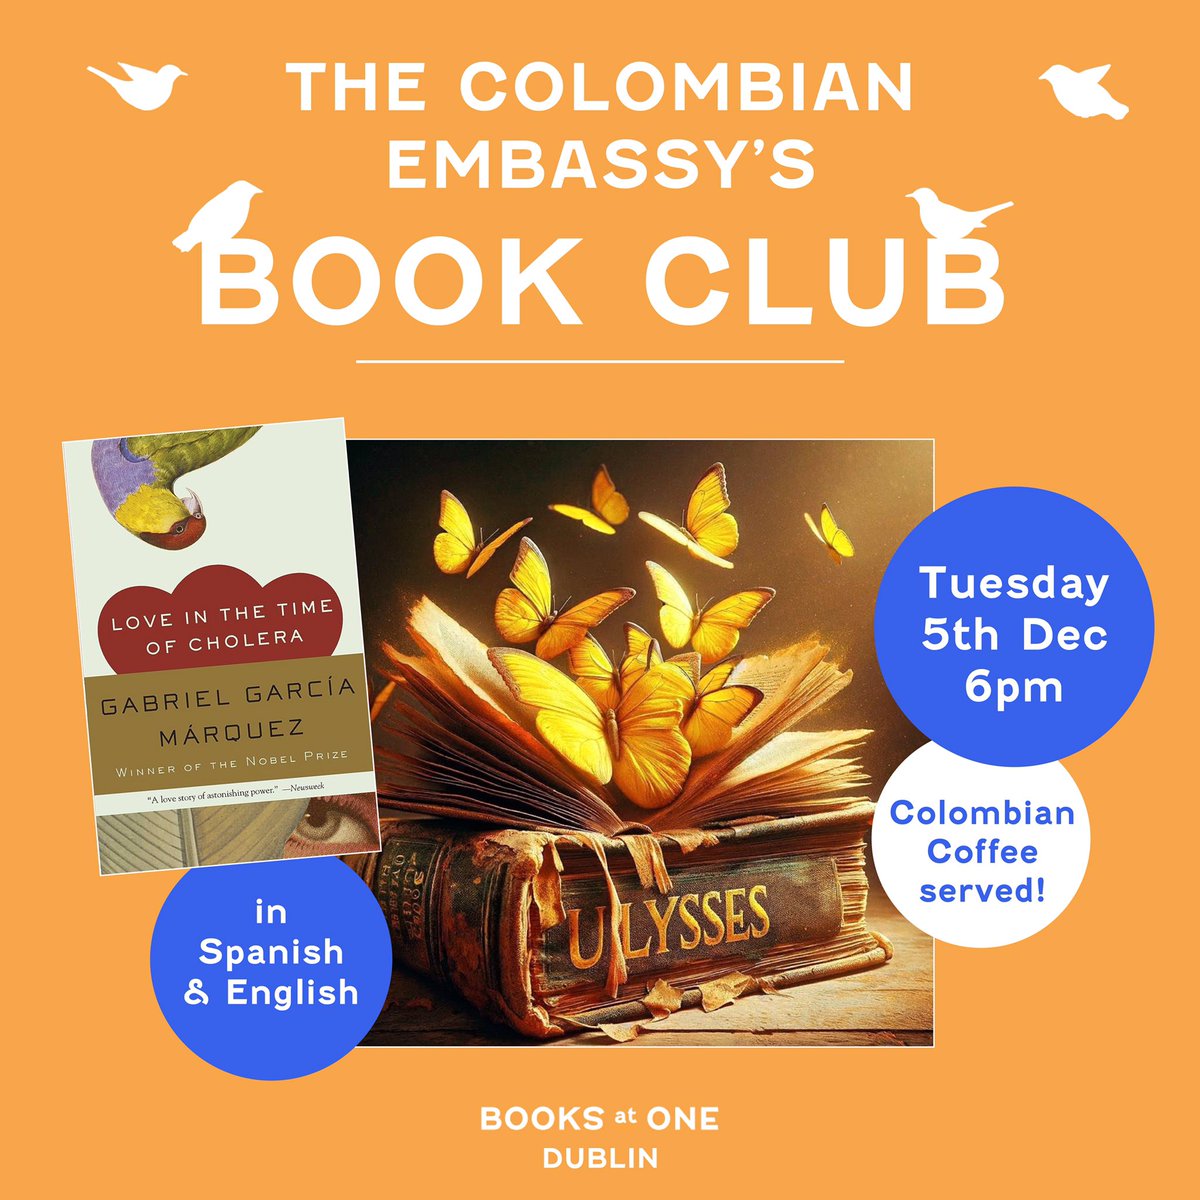 We’re very excited to be hosting the launch of the Colombian Embassy’s book club! Join us next Tuesday 5th December at 6pm to discover “Love in the time of Cholera” by Gabriel García Márquez 📚 In English and Spanish, and Colombian coffee will be served on the night ☕️